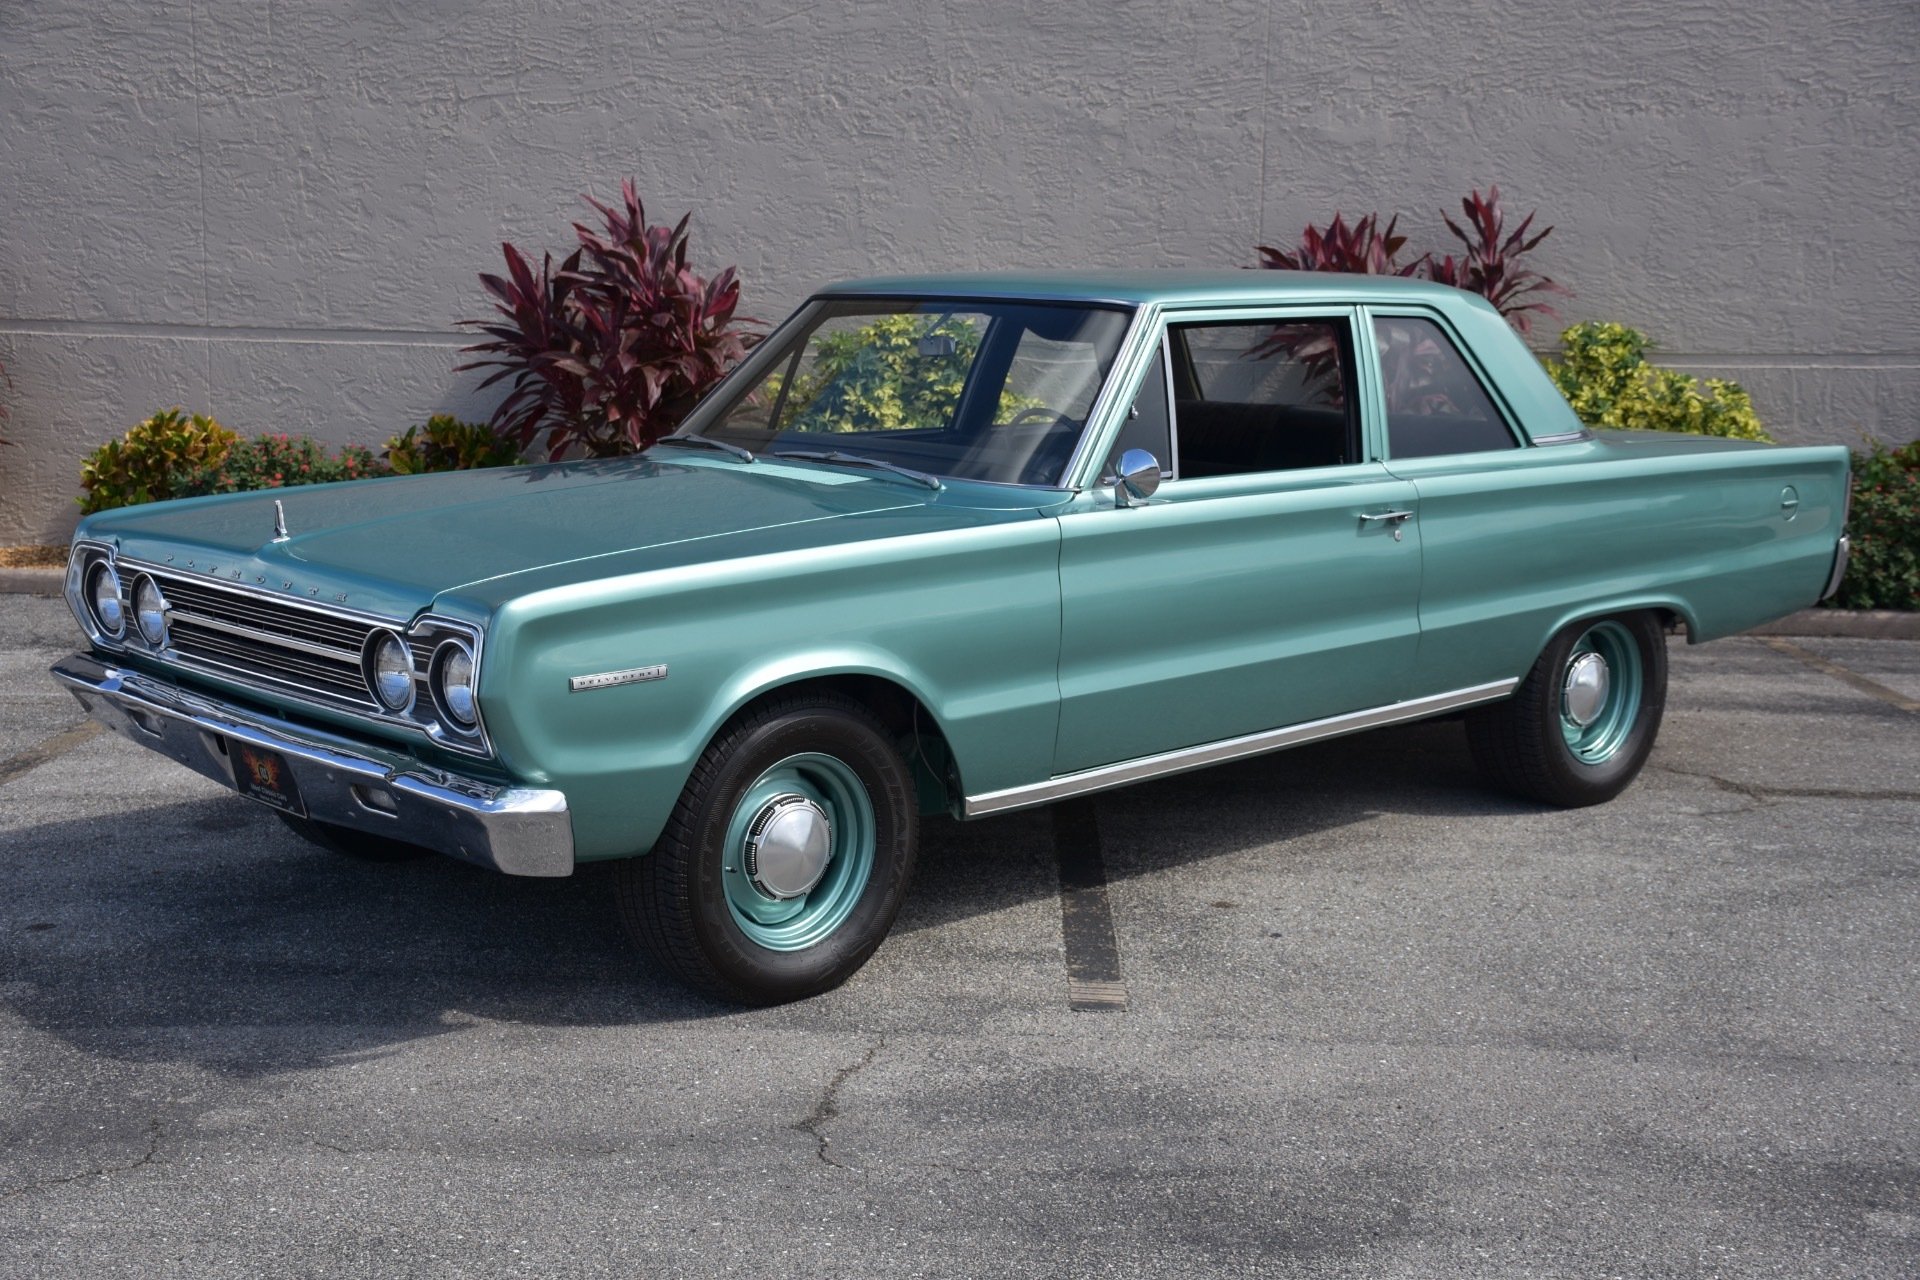 1967 Plymouth Belvedere 440